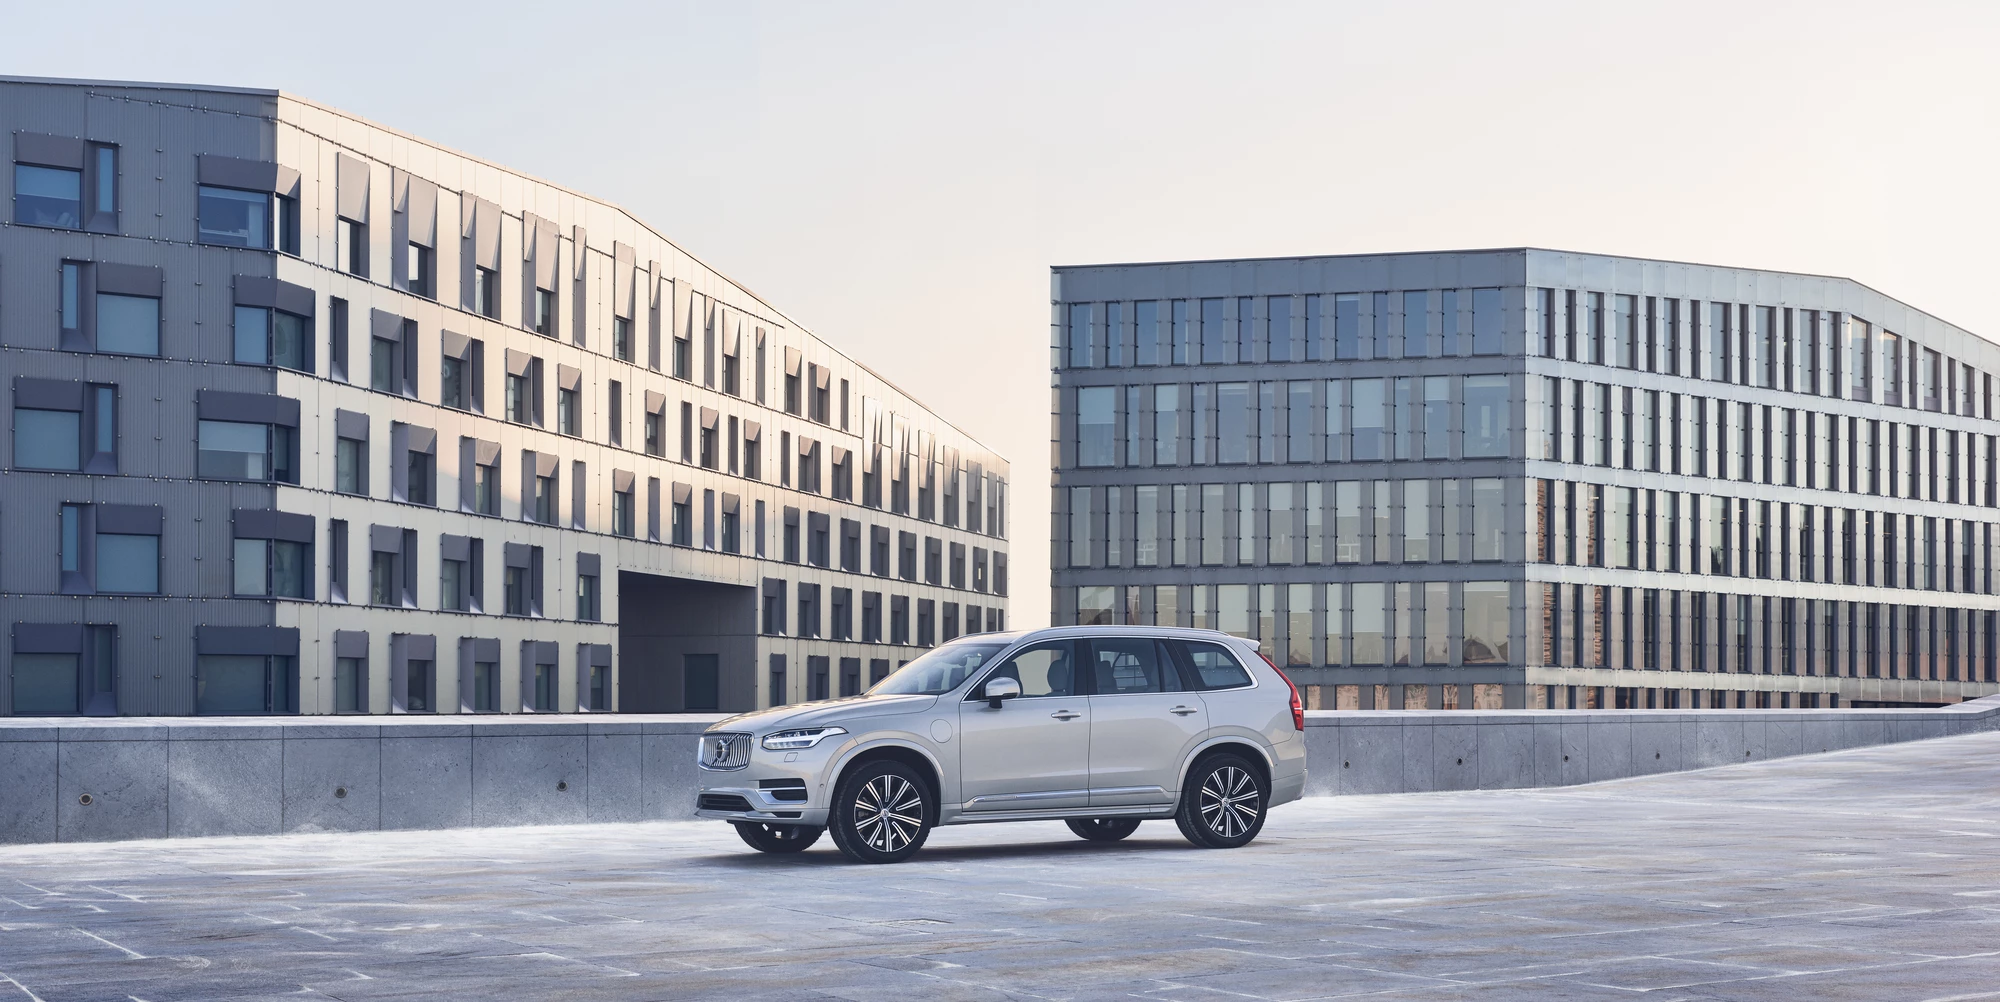 Featured Model - XC90